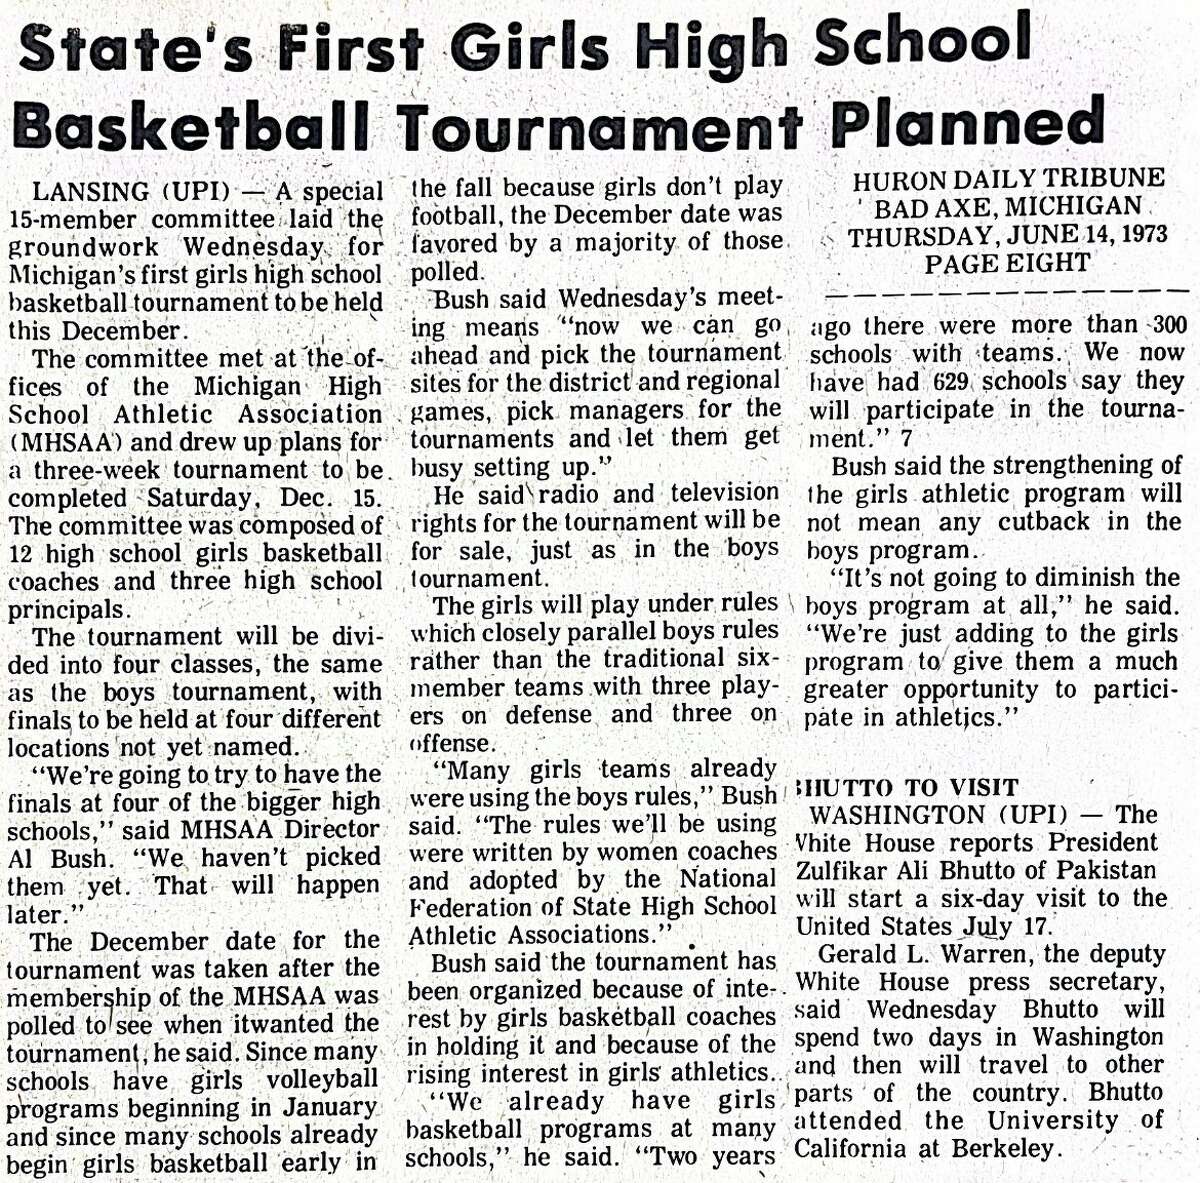 The MHSAA finalizes plans for the first state girls basketball tournament in 1973.